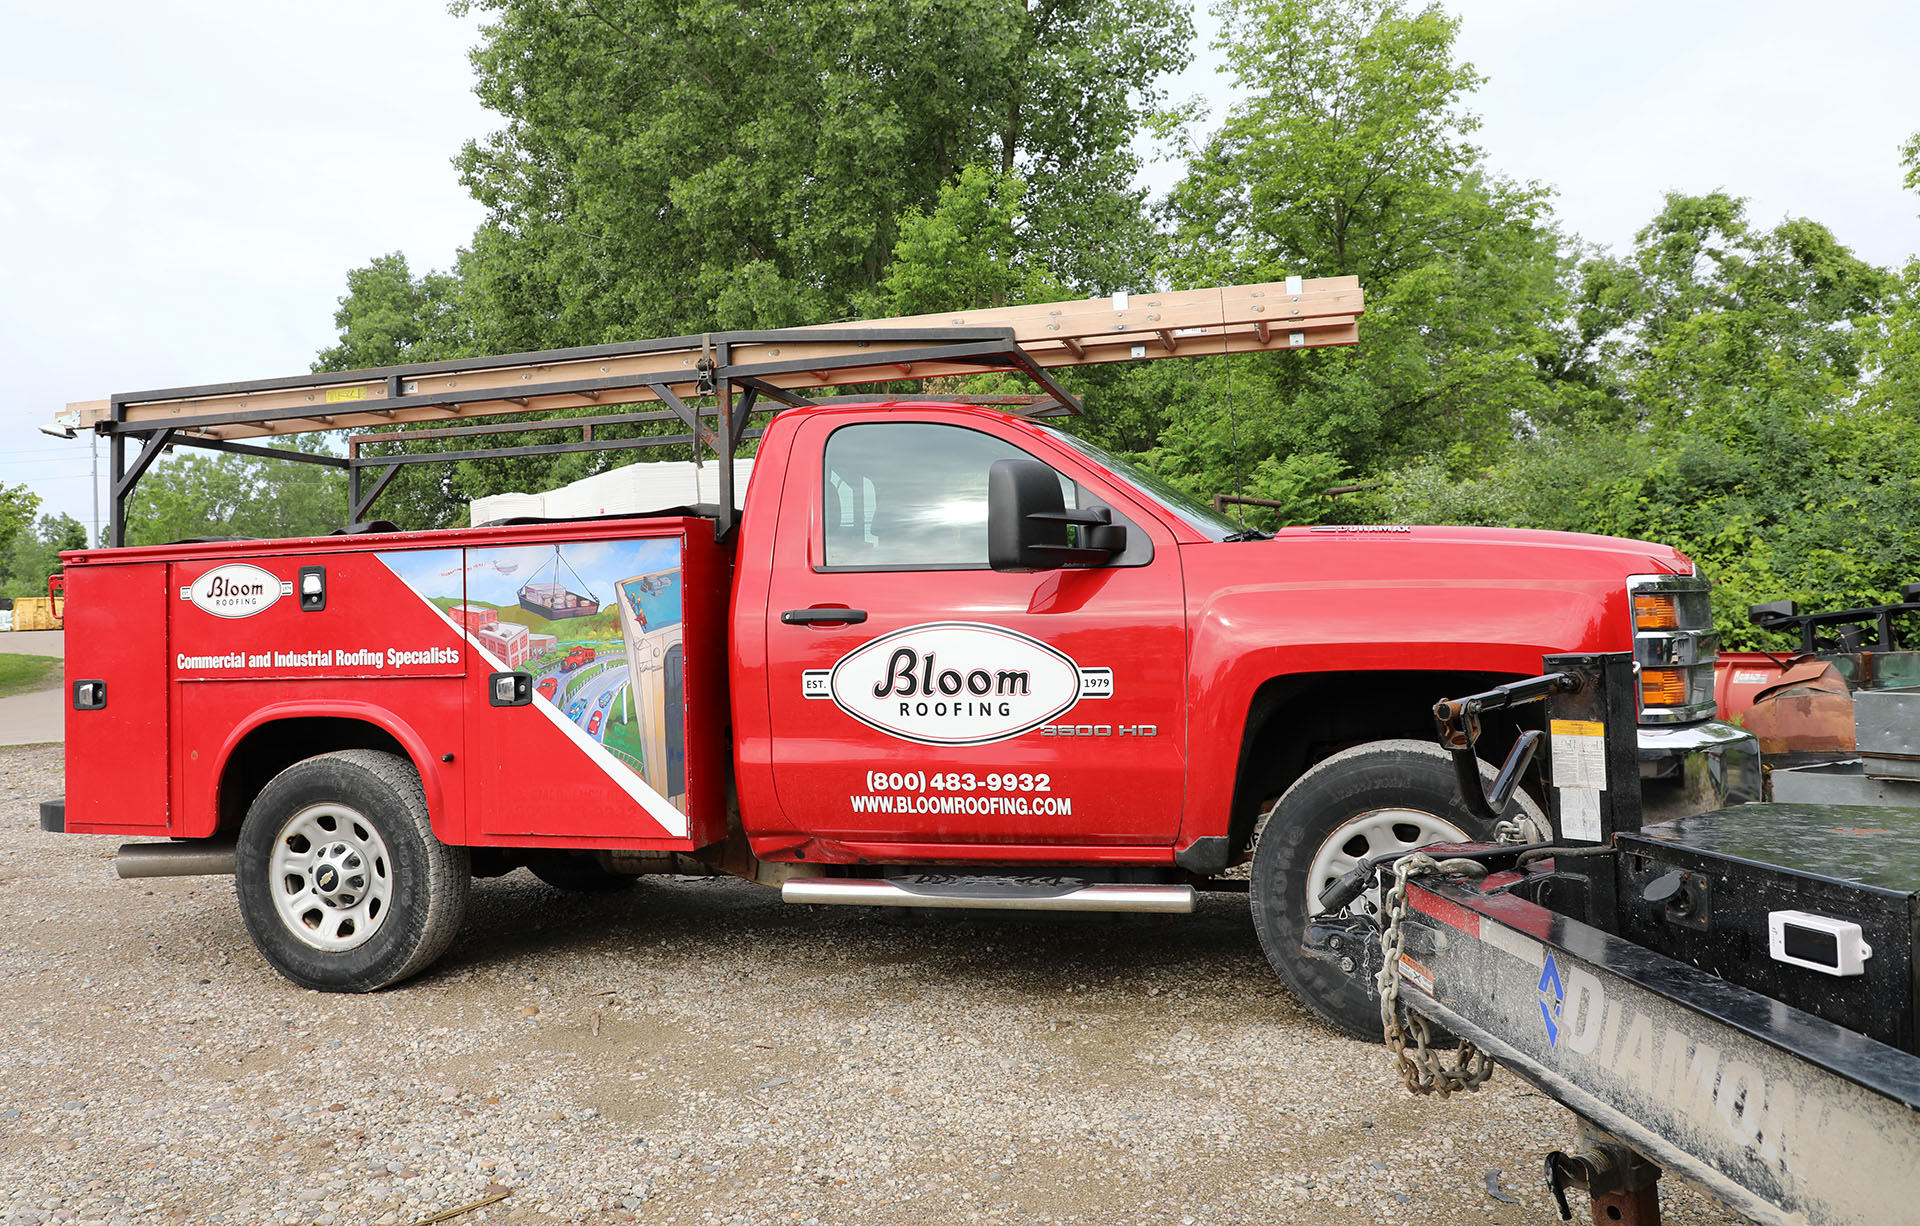 Bloom Roofing Truck with a TennaMINI Solar on a trailer